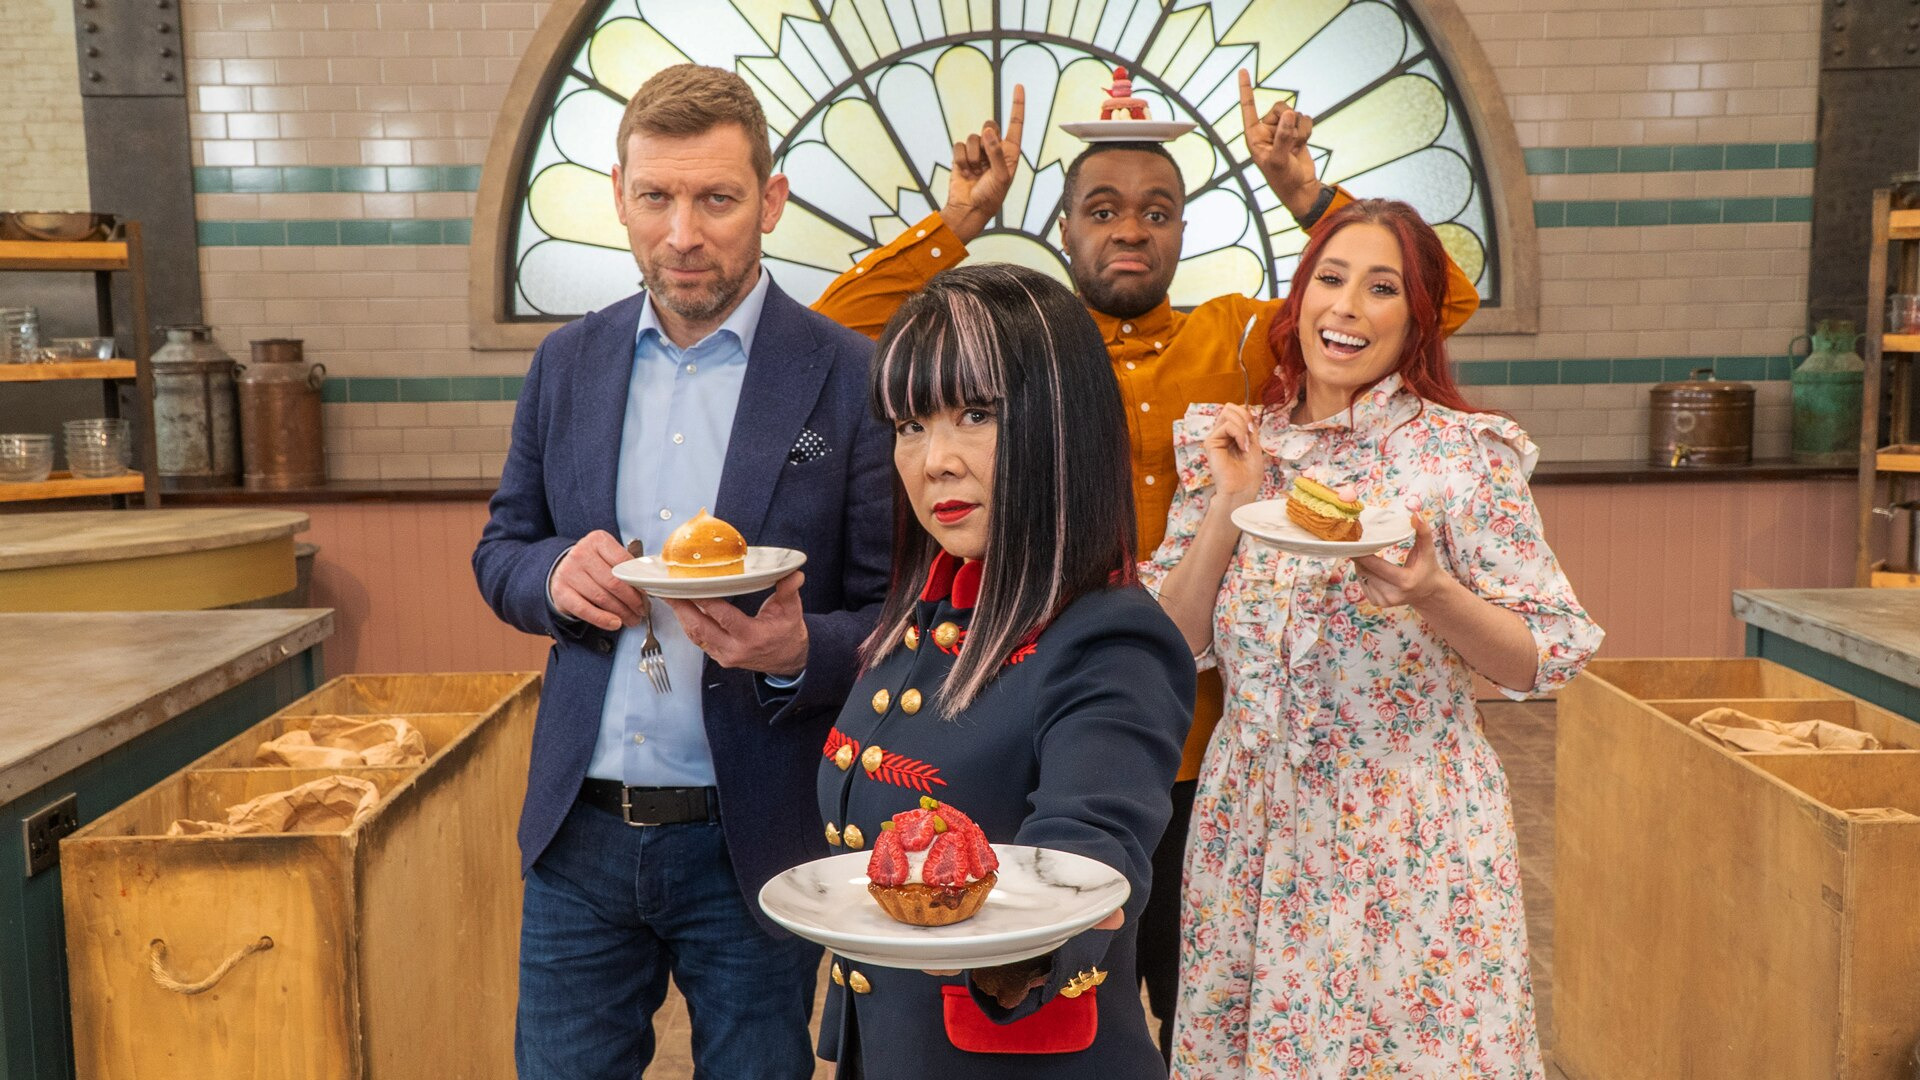 Show Bake Off: The Professionals